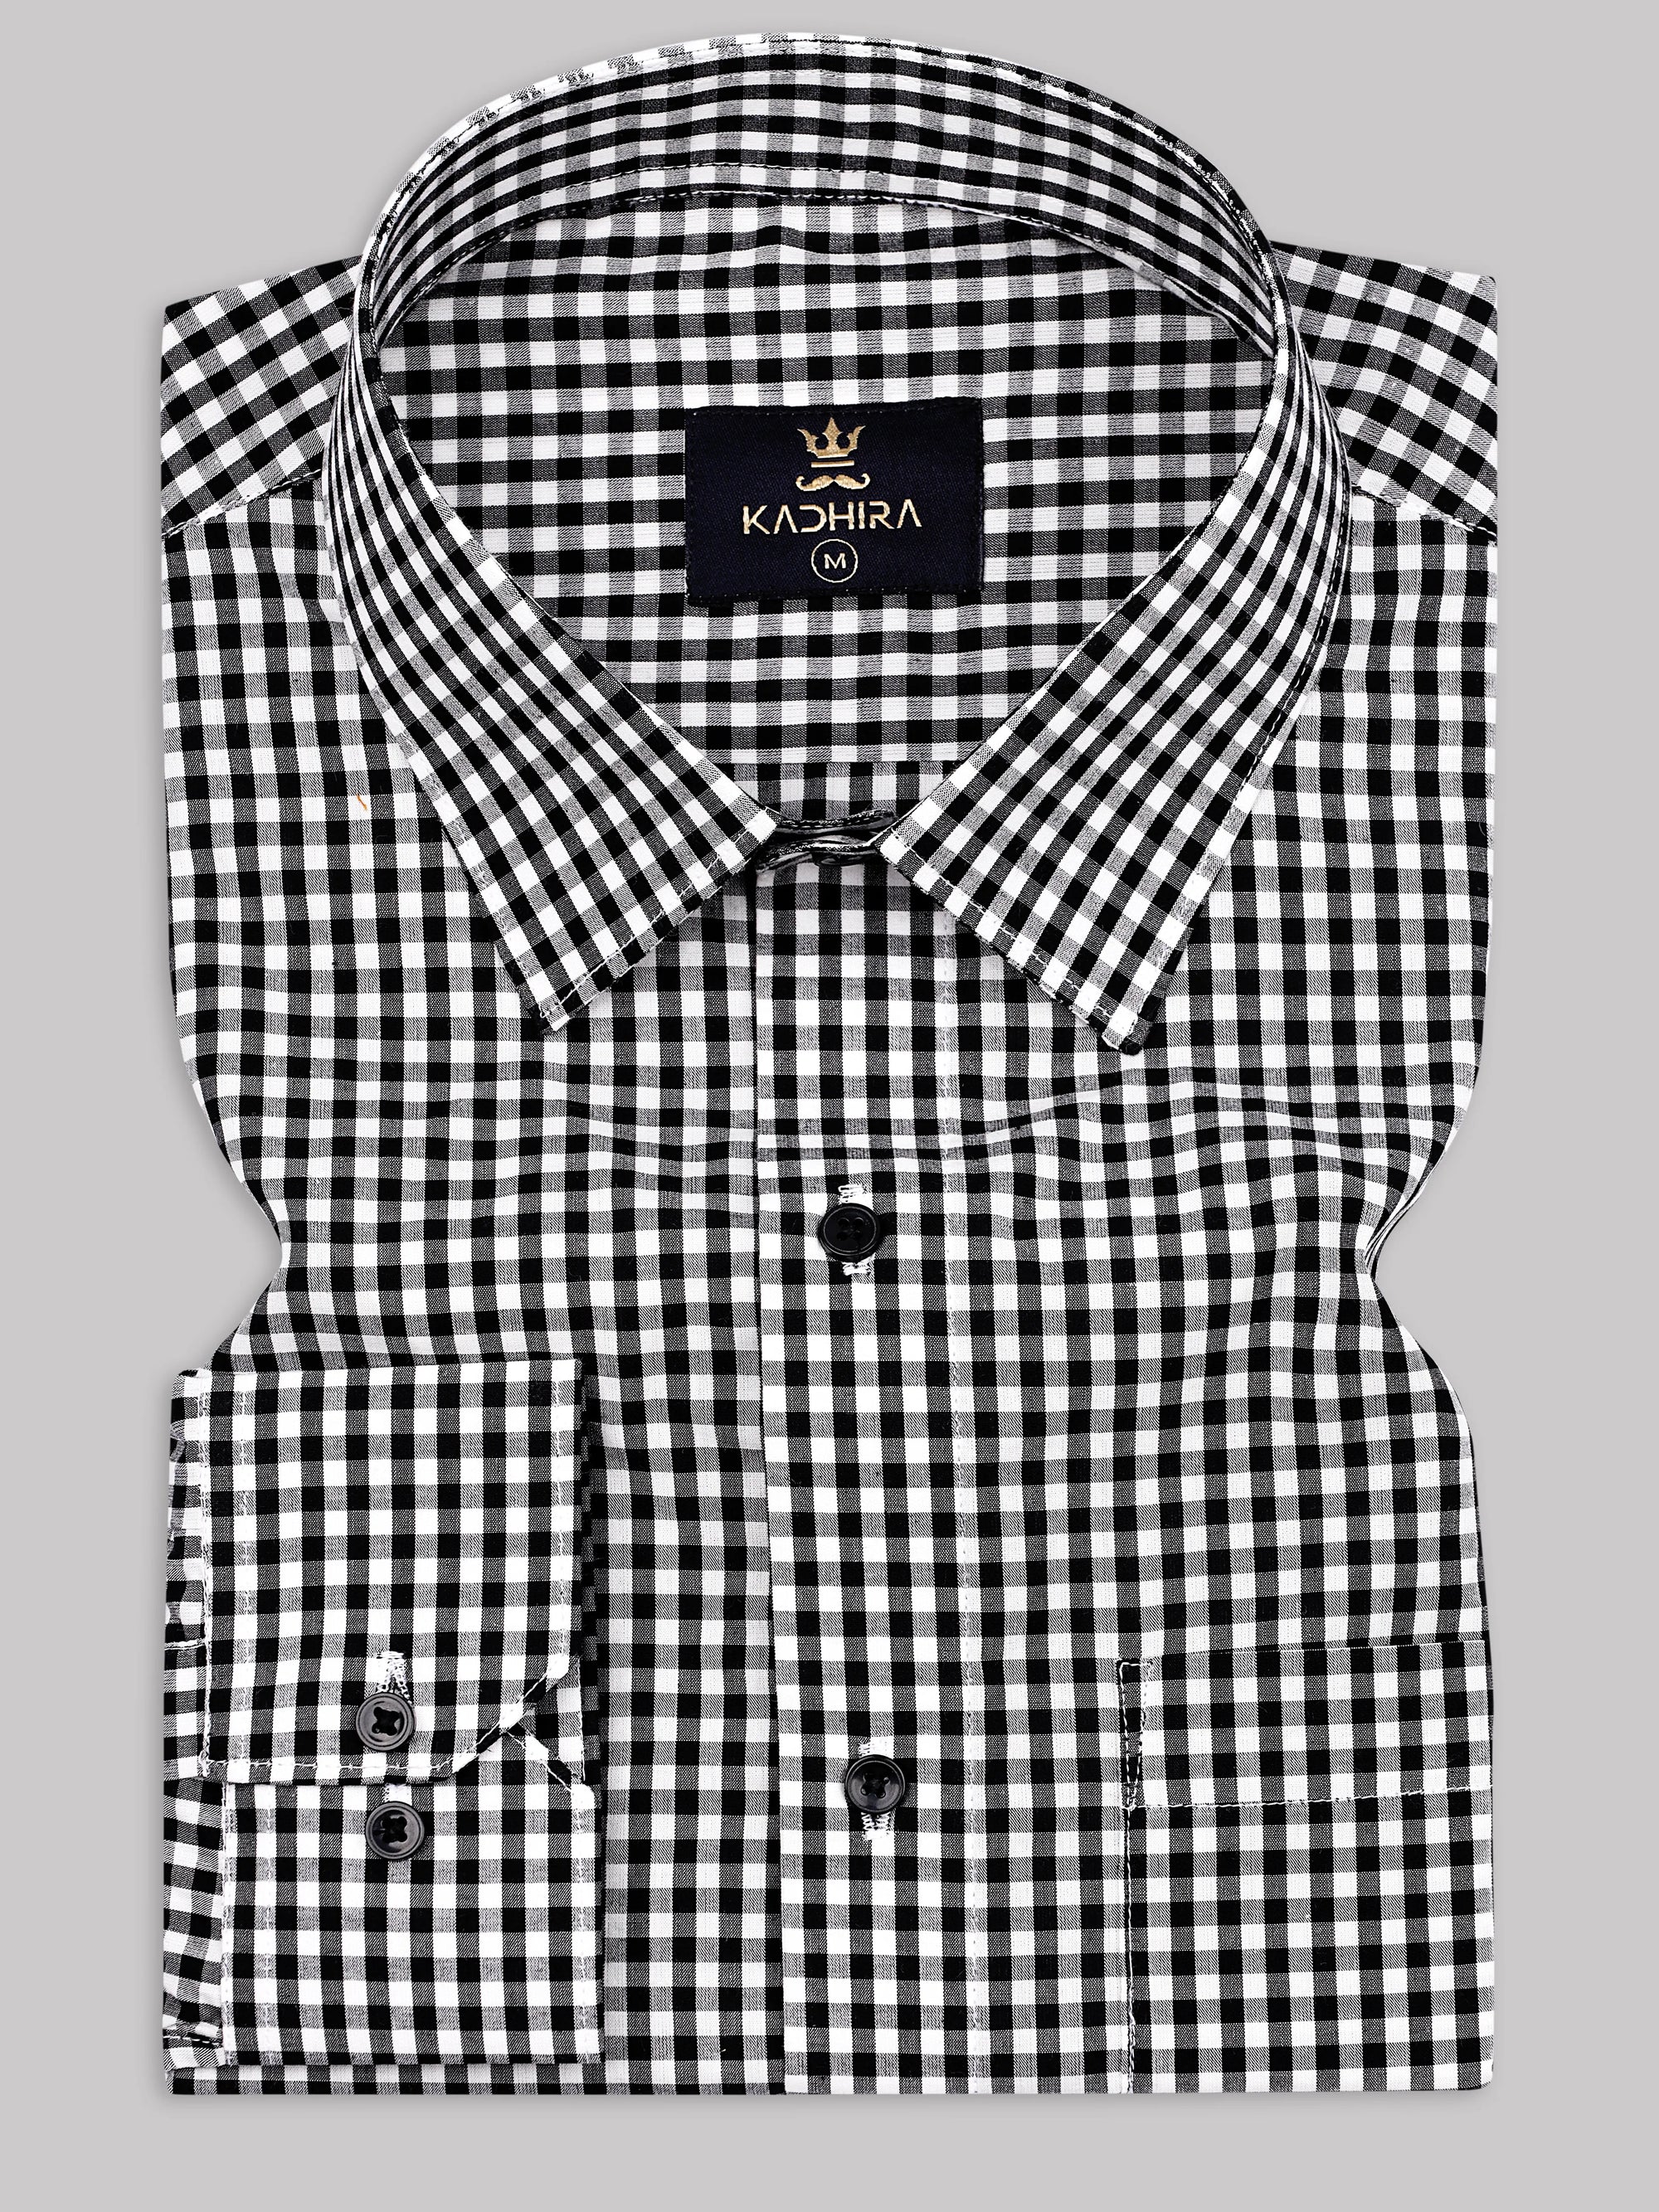 Cool Black With White Gingham Check Super Premium Cotton Shirt-[ON SALE]